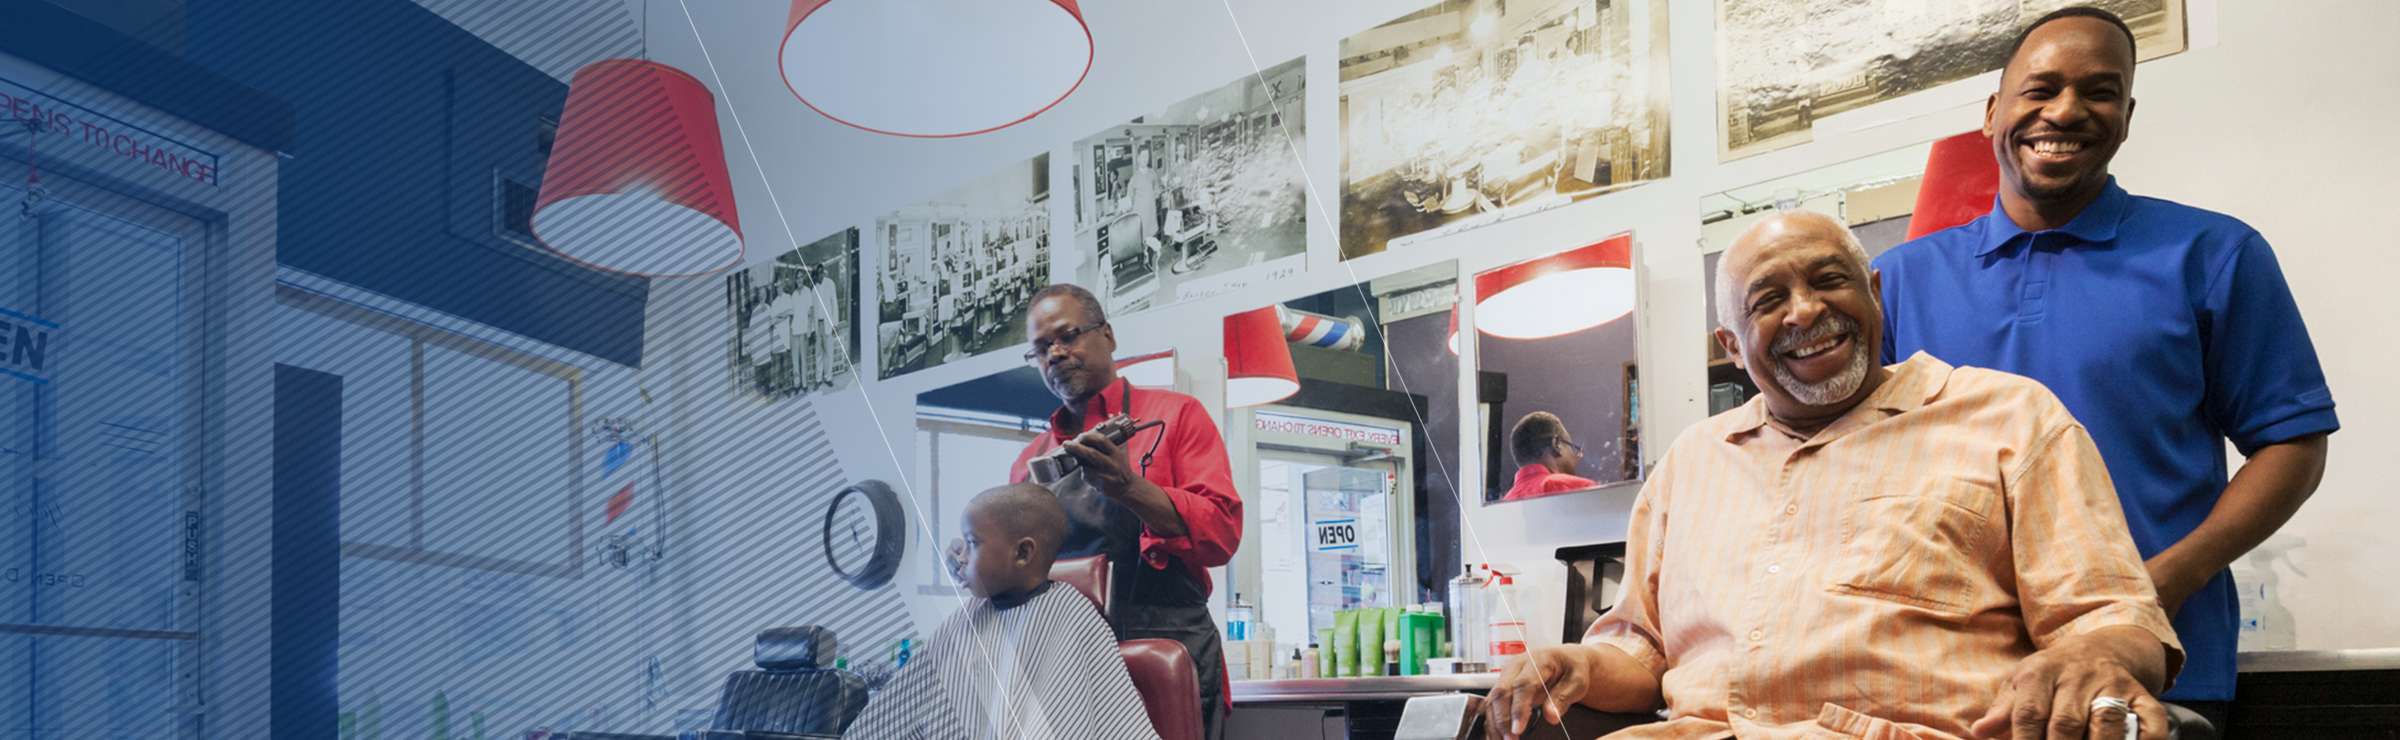 Three men and a little boy in a barber shop together